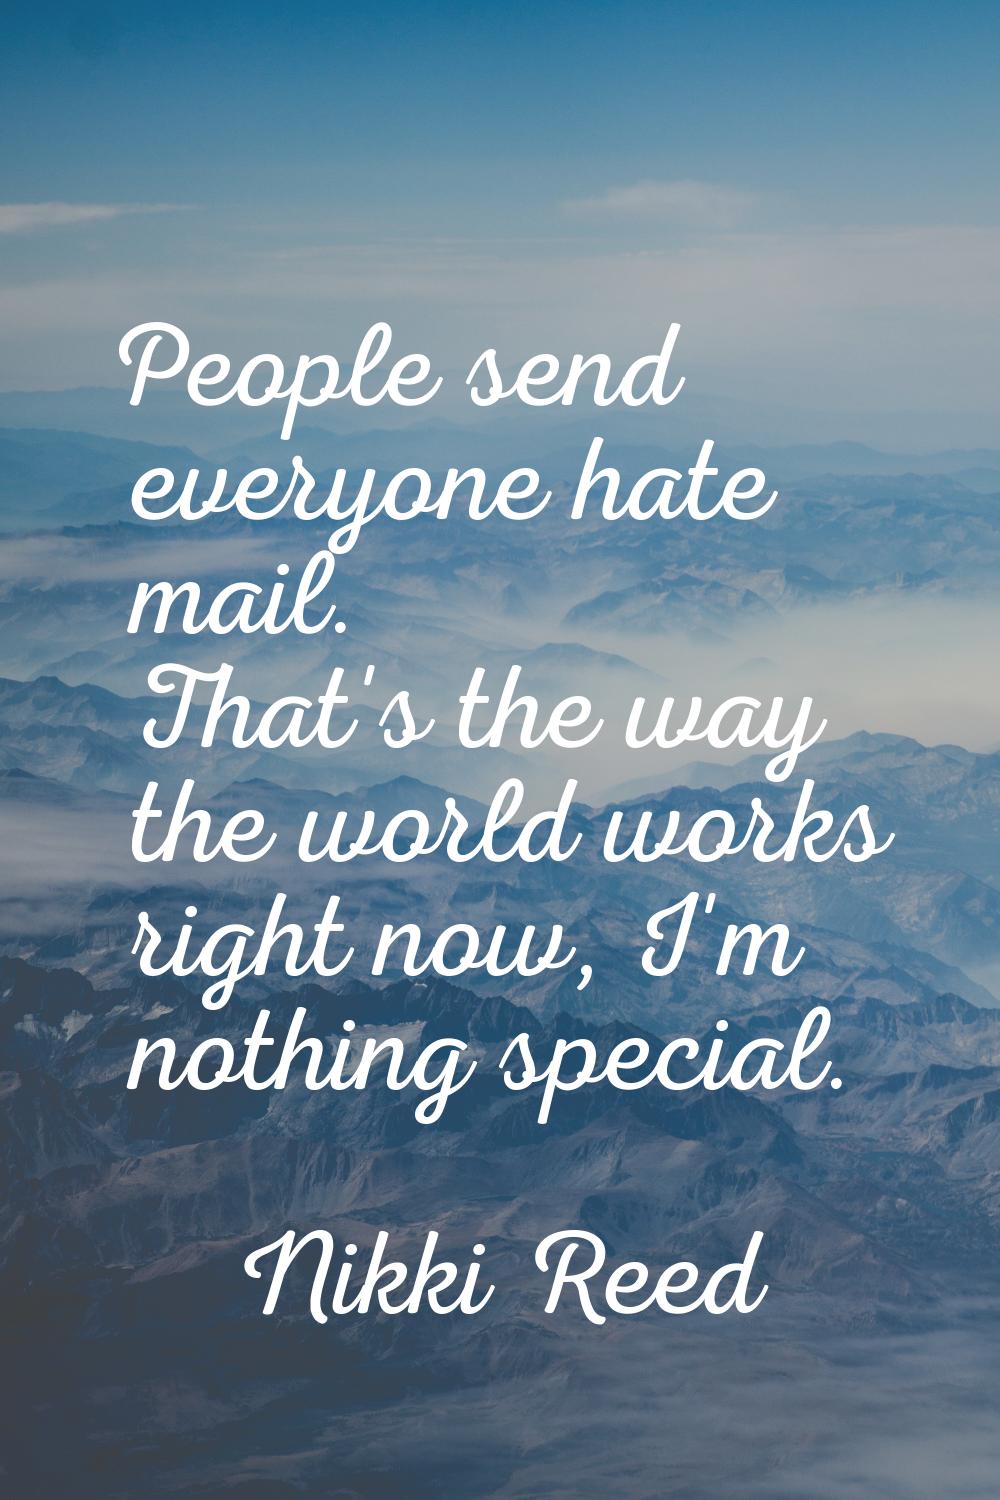 People send everyone hate mail. That's the way the world works right now, I'm nothing special.